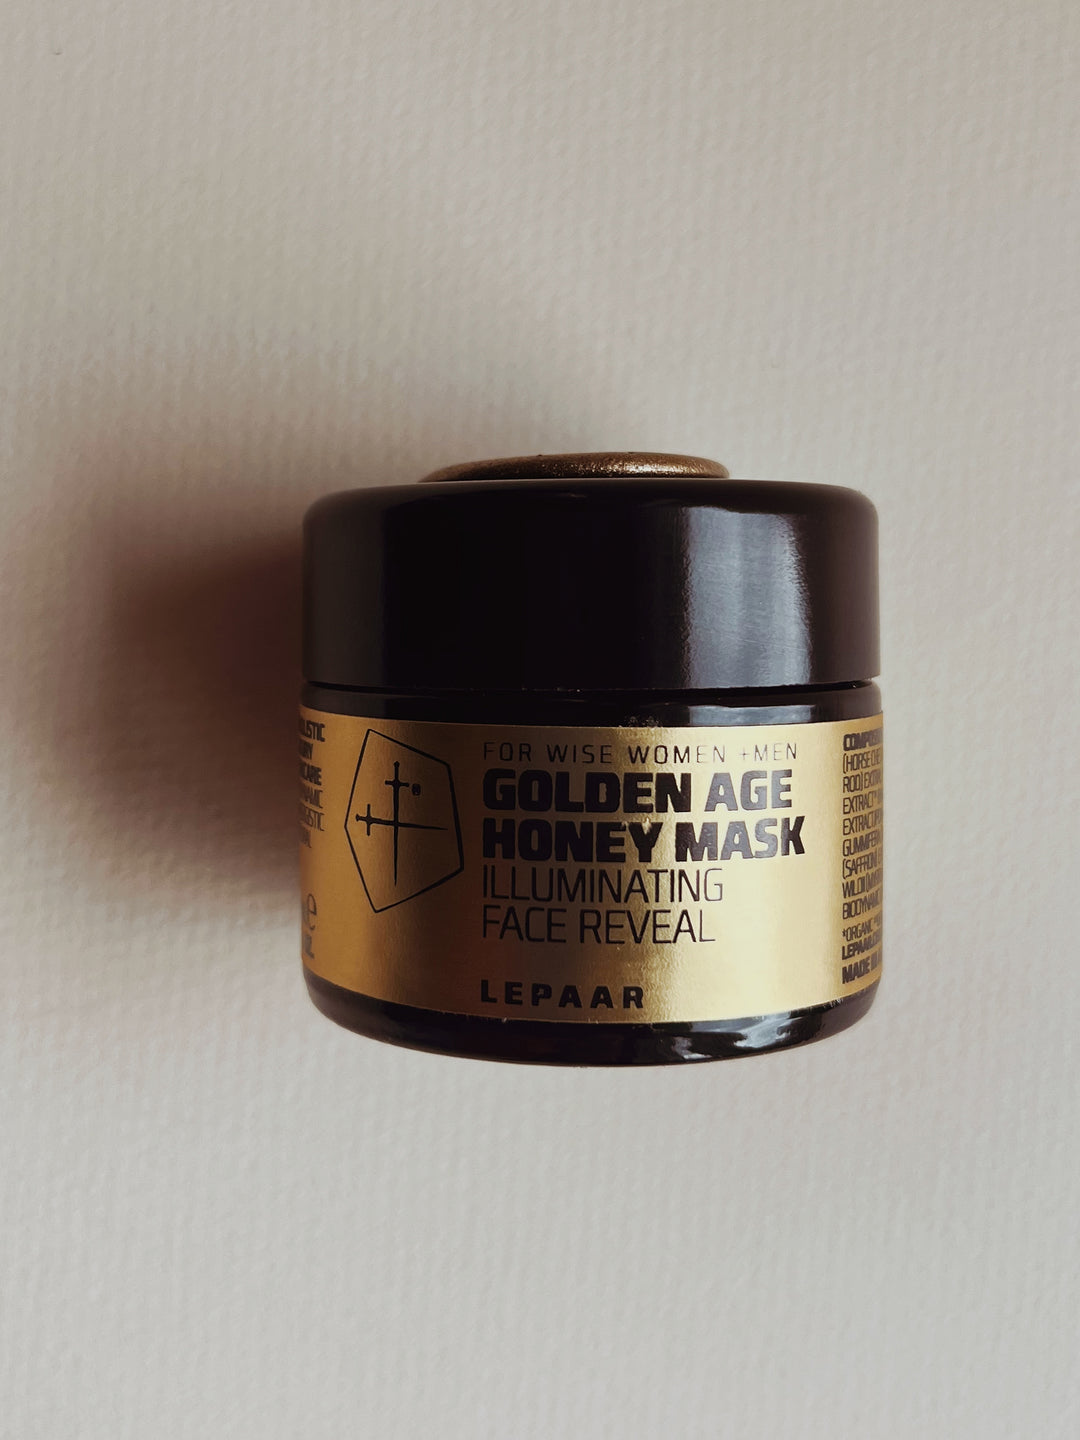 GOLDEN AGE HONEY MASK / Enzymatic Face Reveal